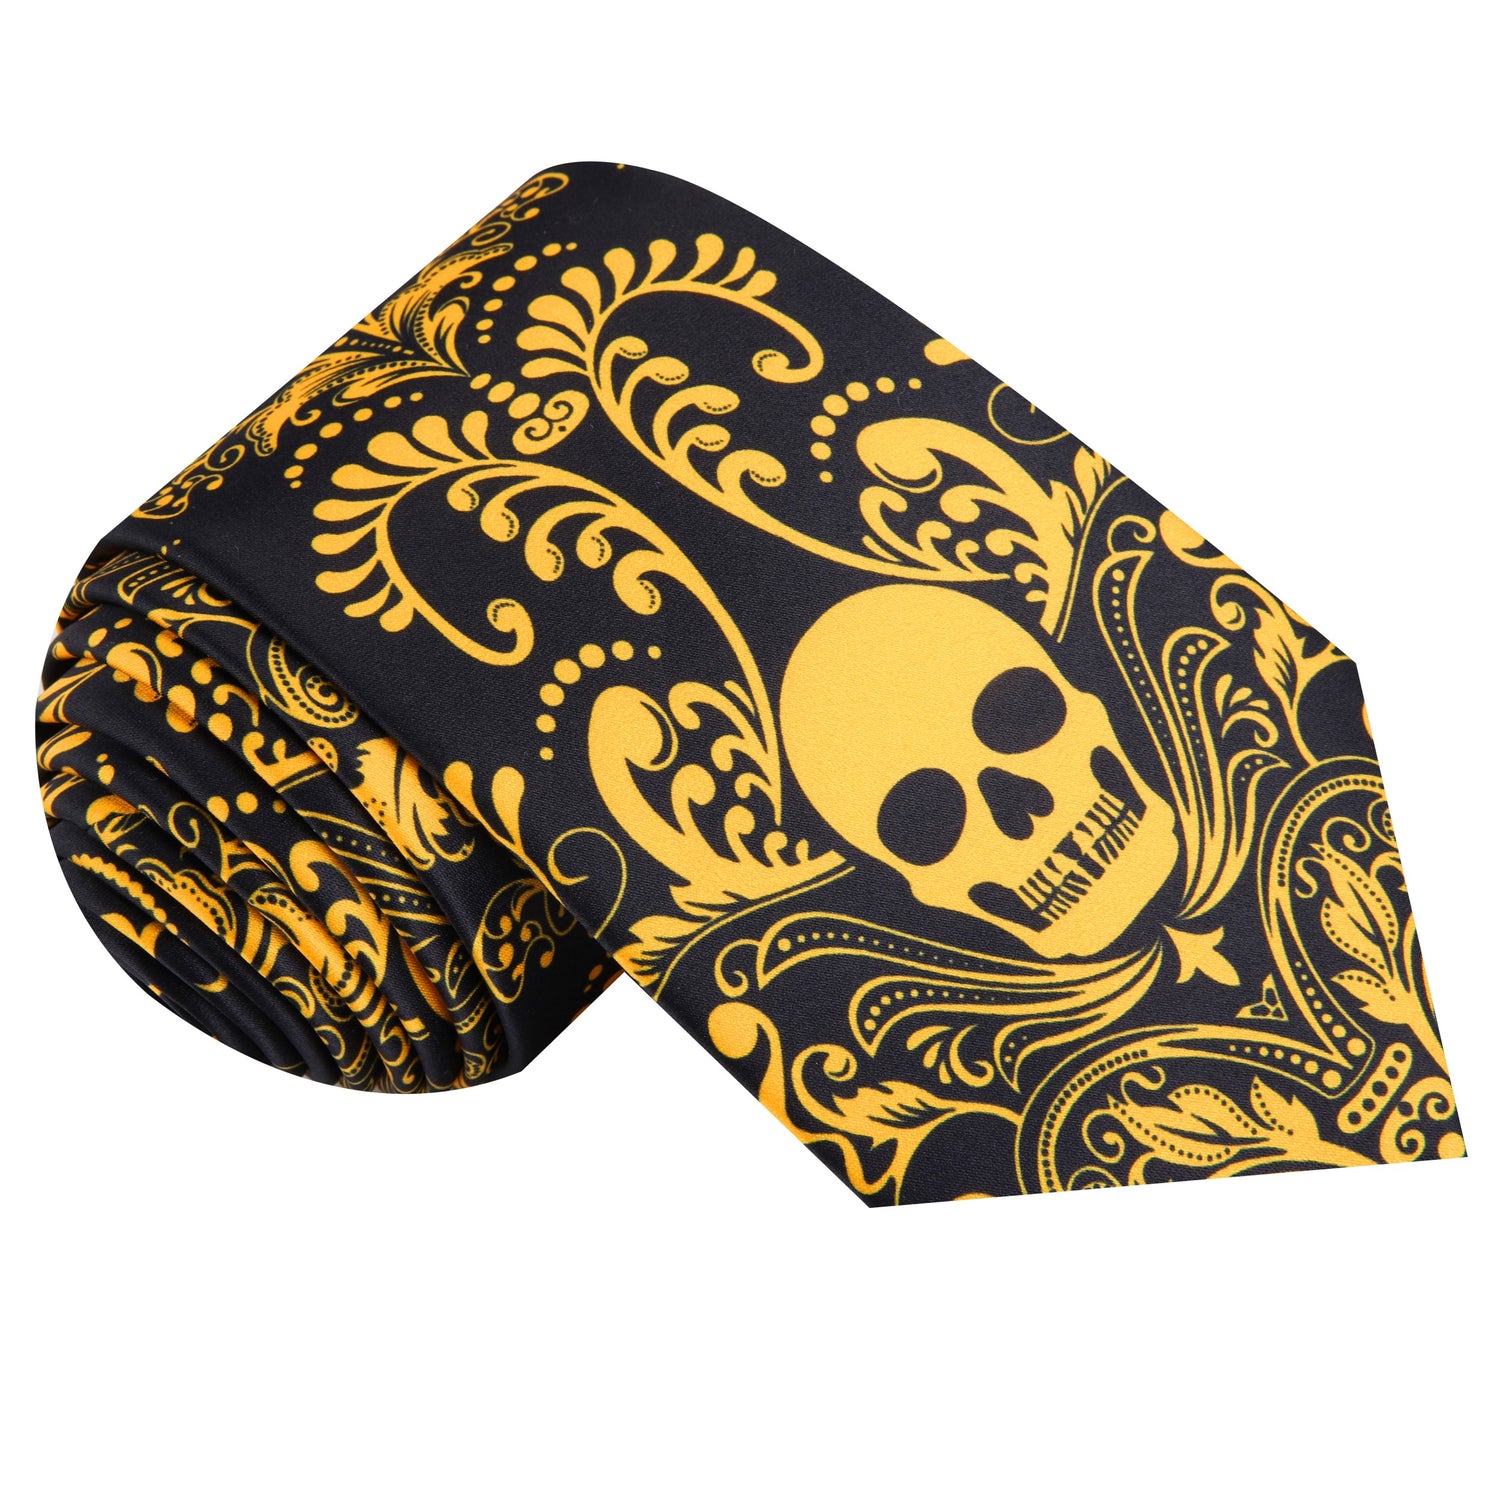 Single Tie: Black and Yellow Gold Intricate Skull Tie 